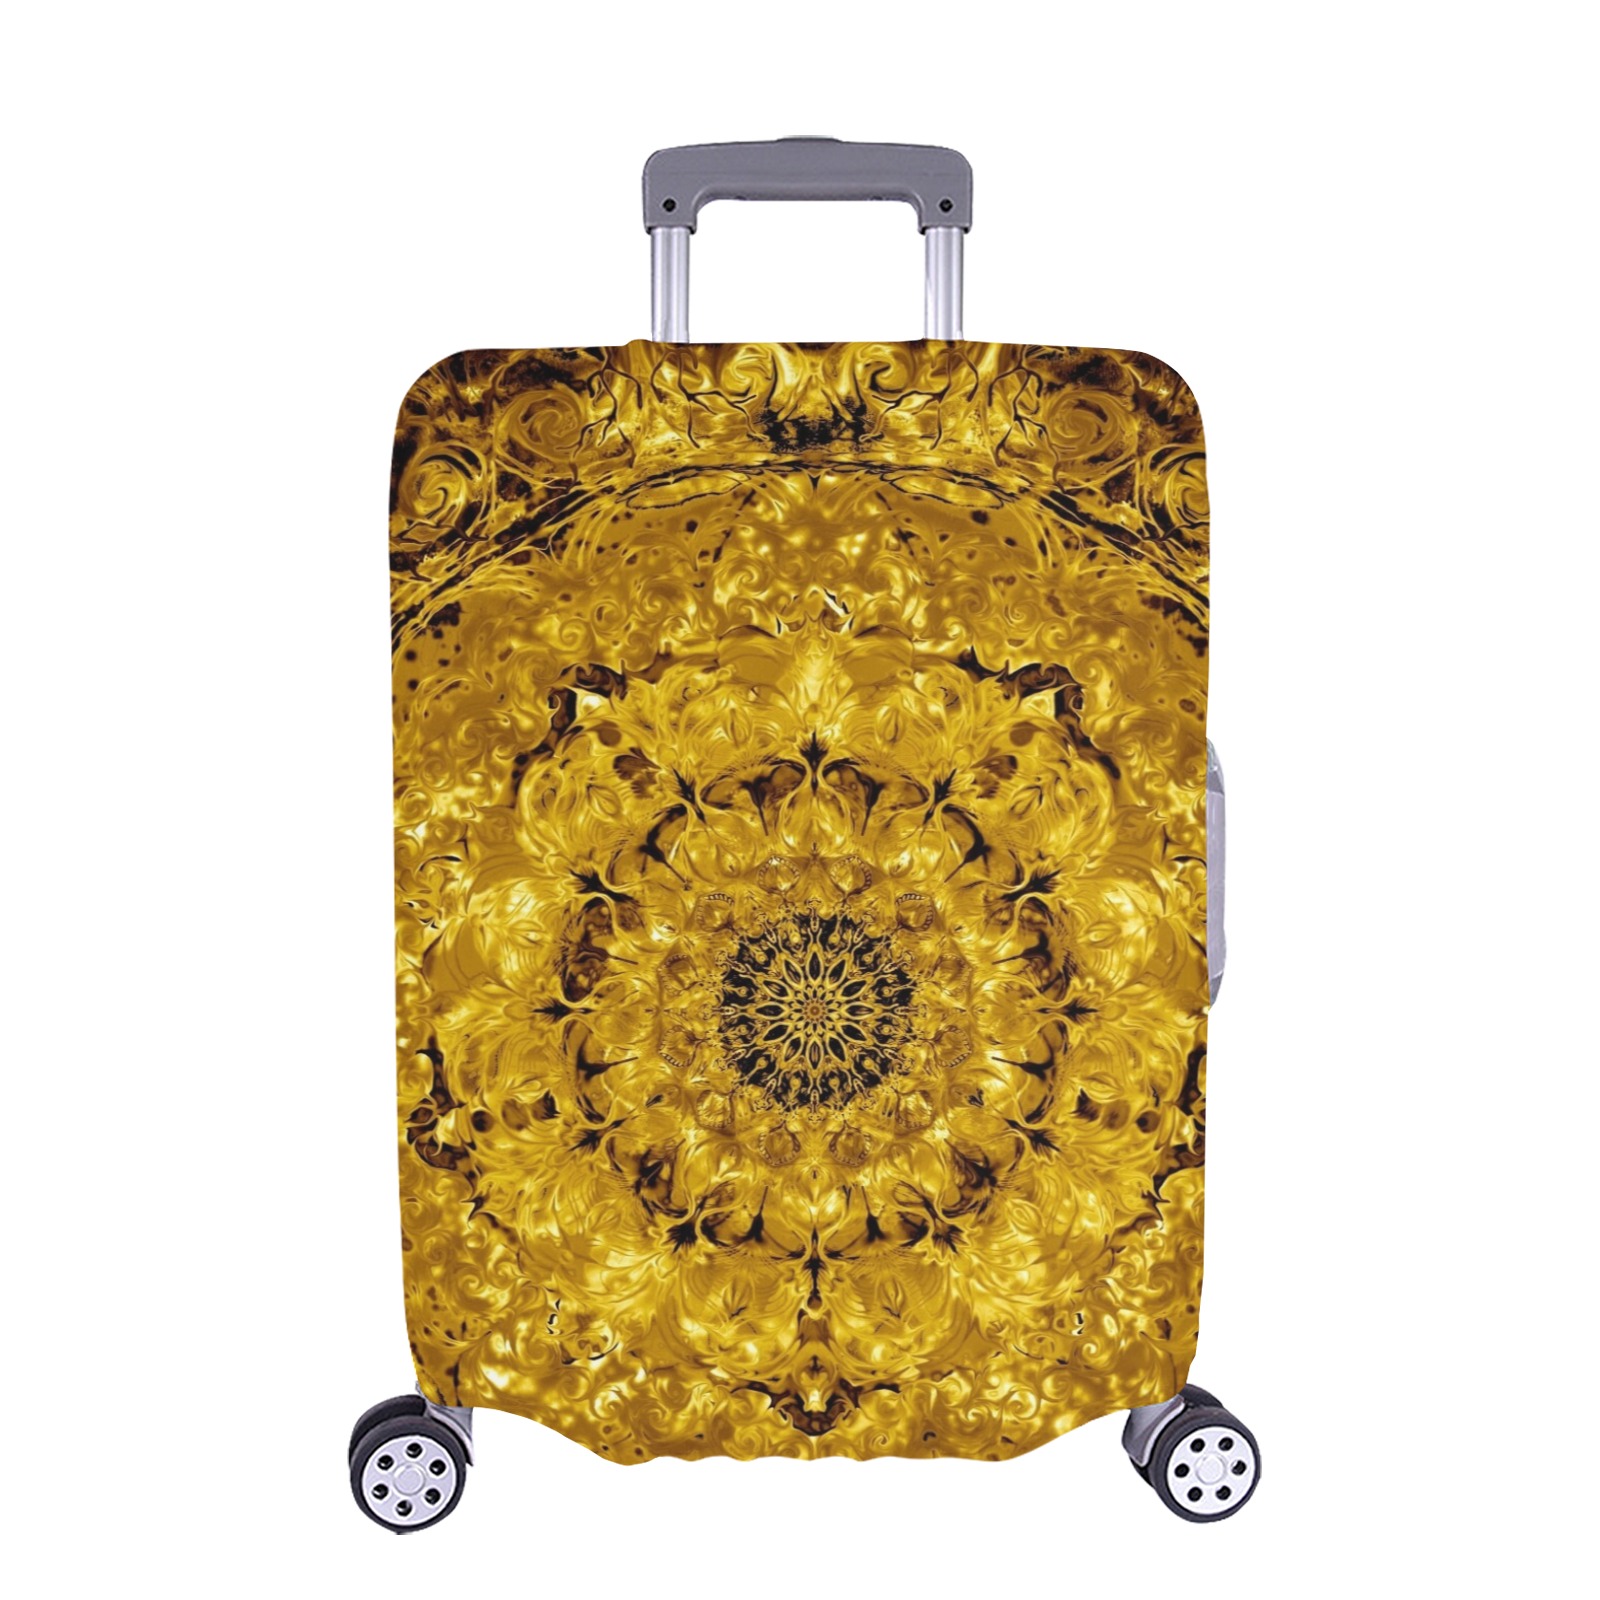 light and water 2-16 Luggage Cover/Extra Large 28"-30"